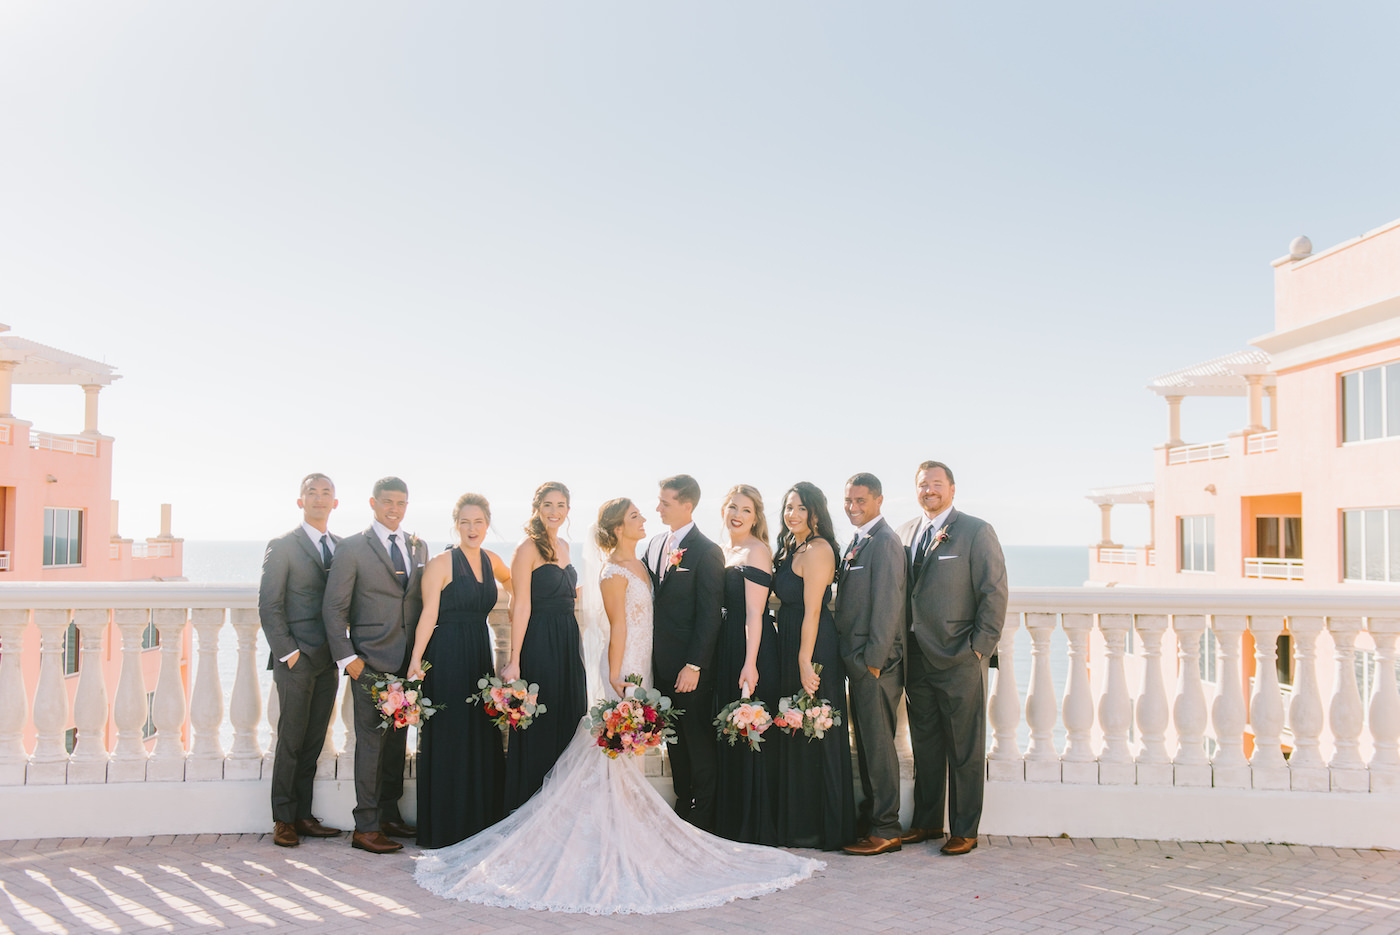 Wedding Party Portrait on Outdoor Rooftop | Bridesmaids in Black Long Dresses with Bright Colorful Bouquets and Groomsmen in Grey Suits | Tampa Bay Wedding Photographer Kera Photography